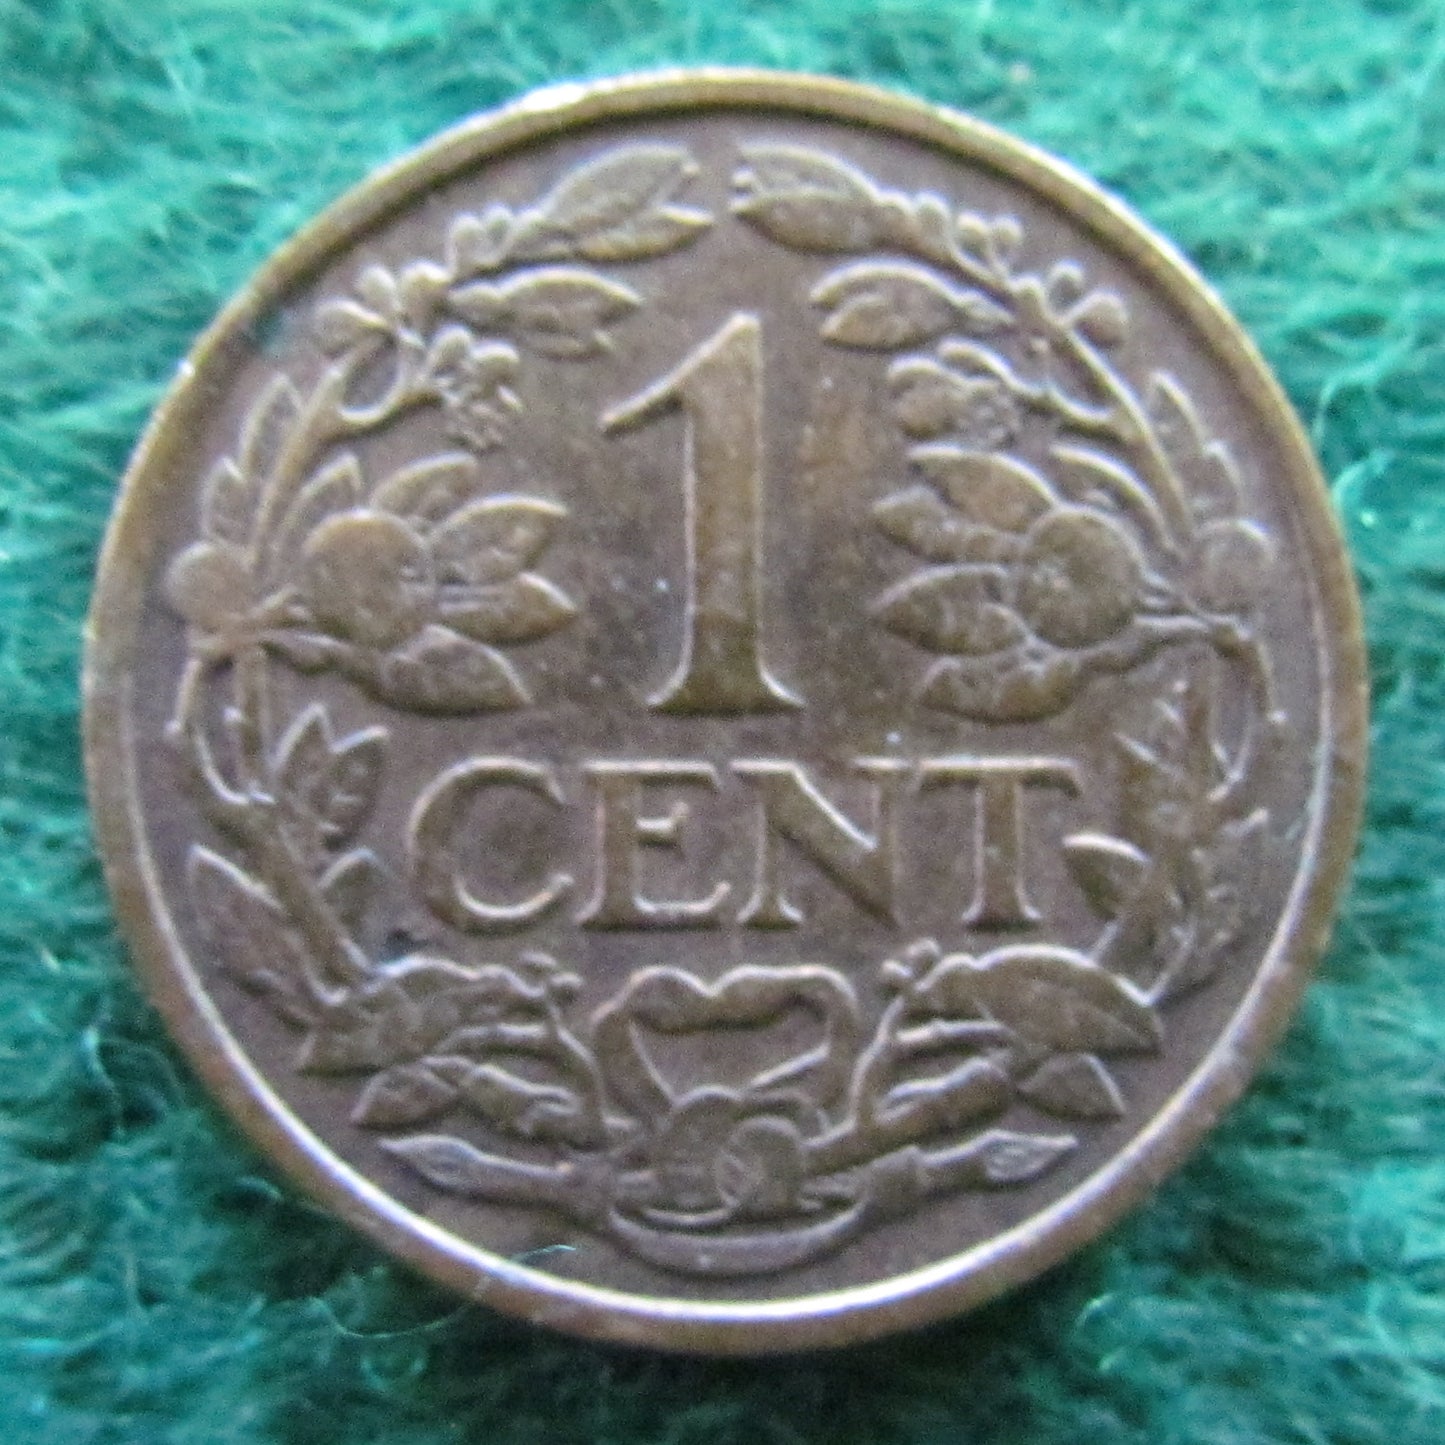 Netherlands 1926 1 Cent Coin